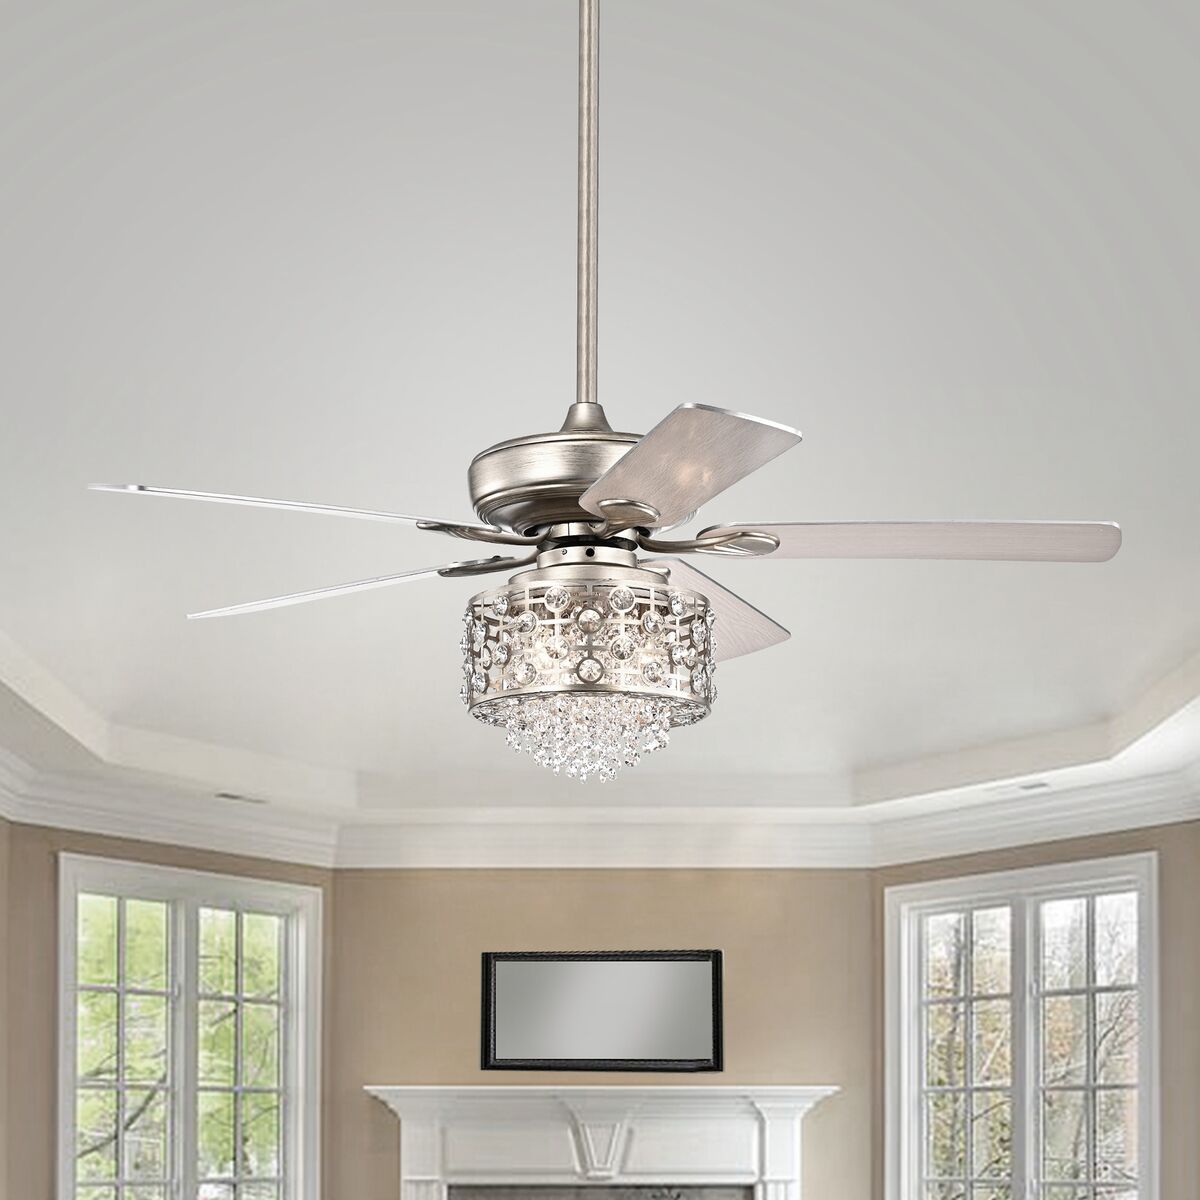 Picture of Warehouse of Tiffany CFL-8440REMO-AS 52 in. Toten Indoor Remote Controlled Ceiling Fan with Light Kit, Silver